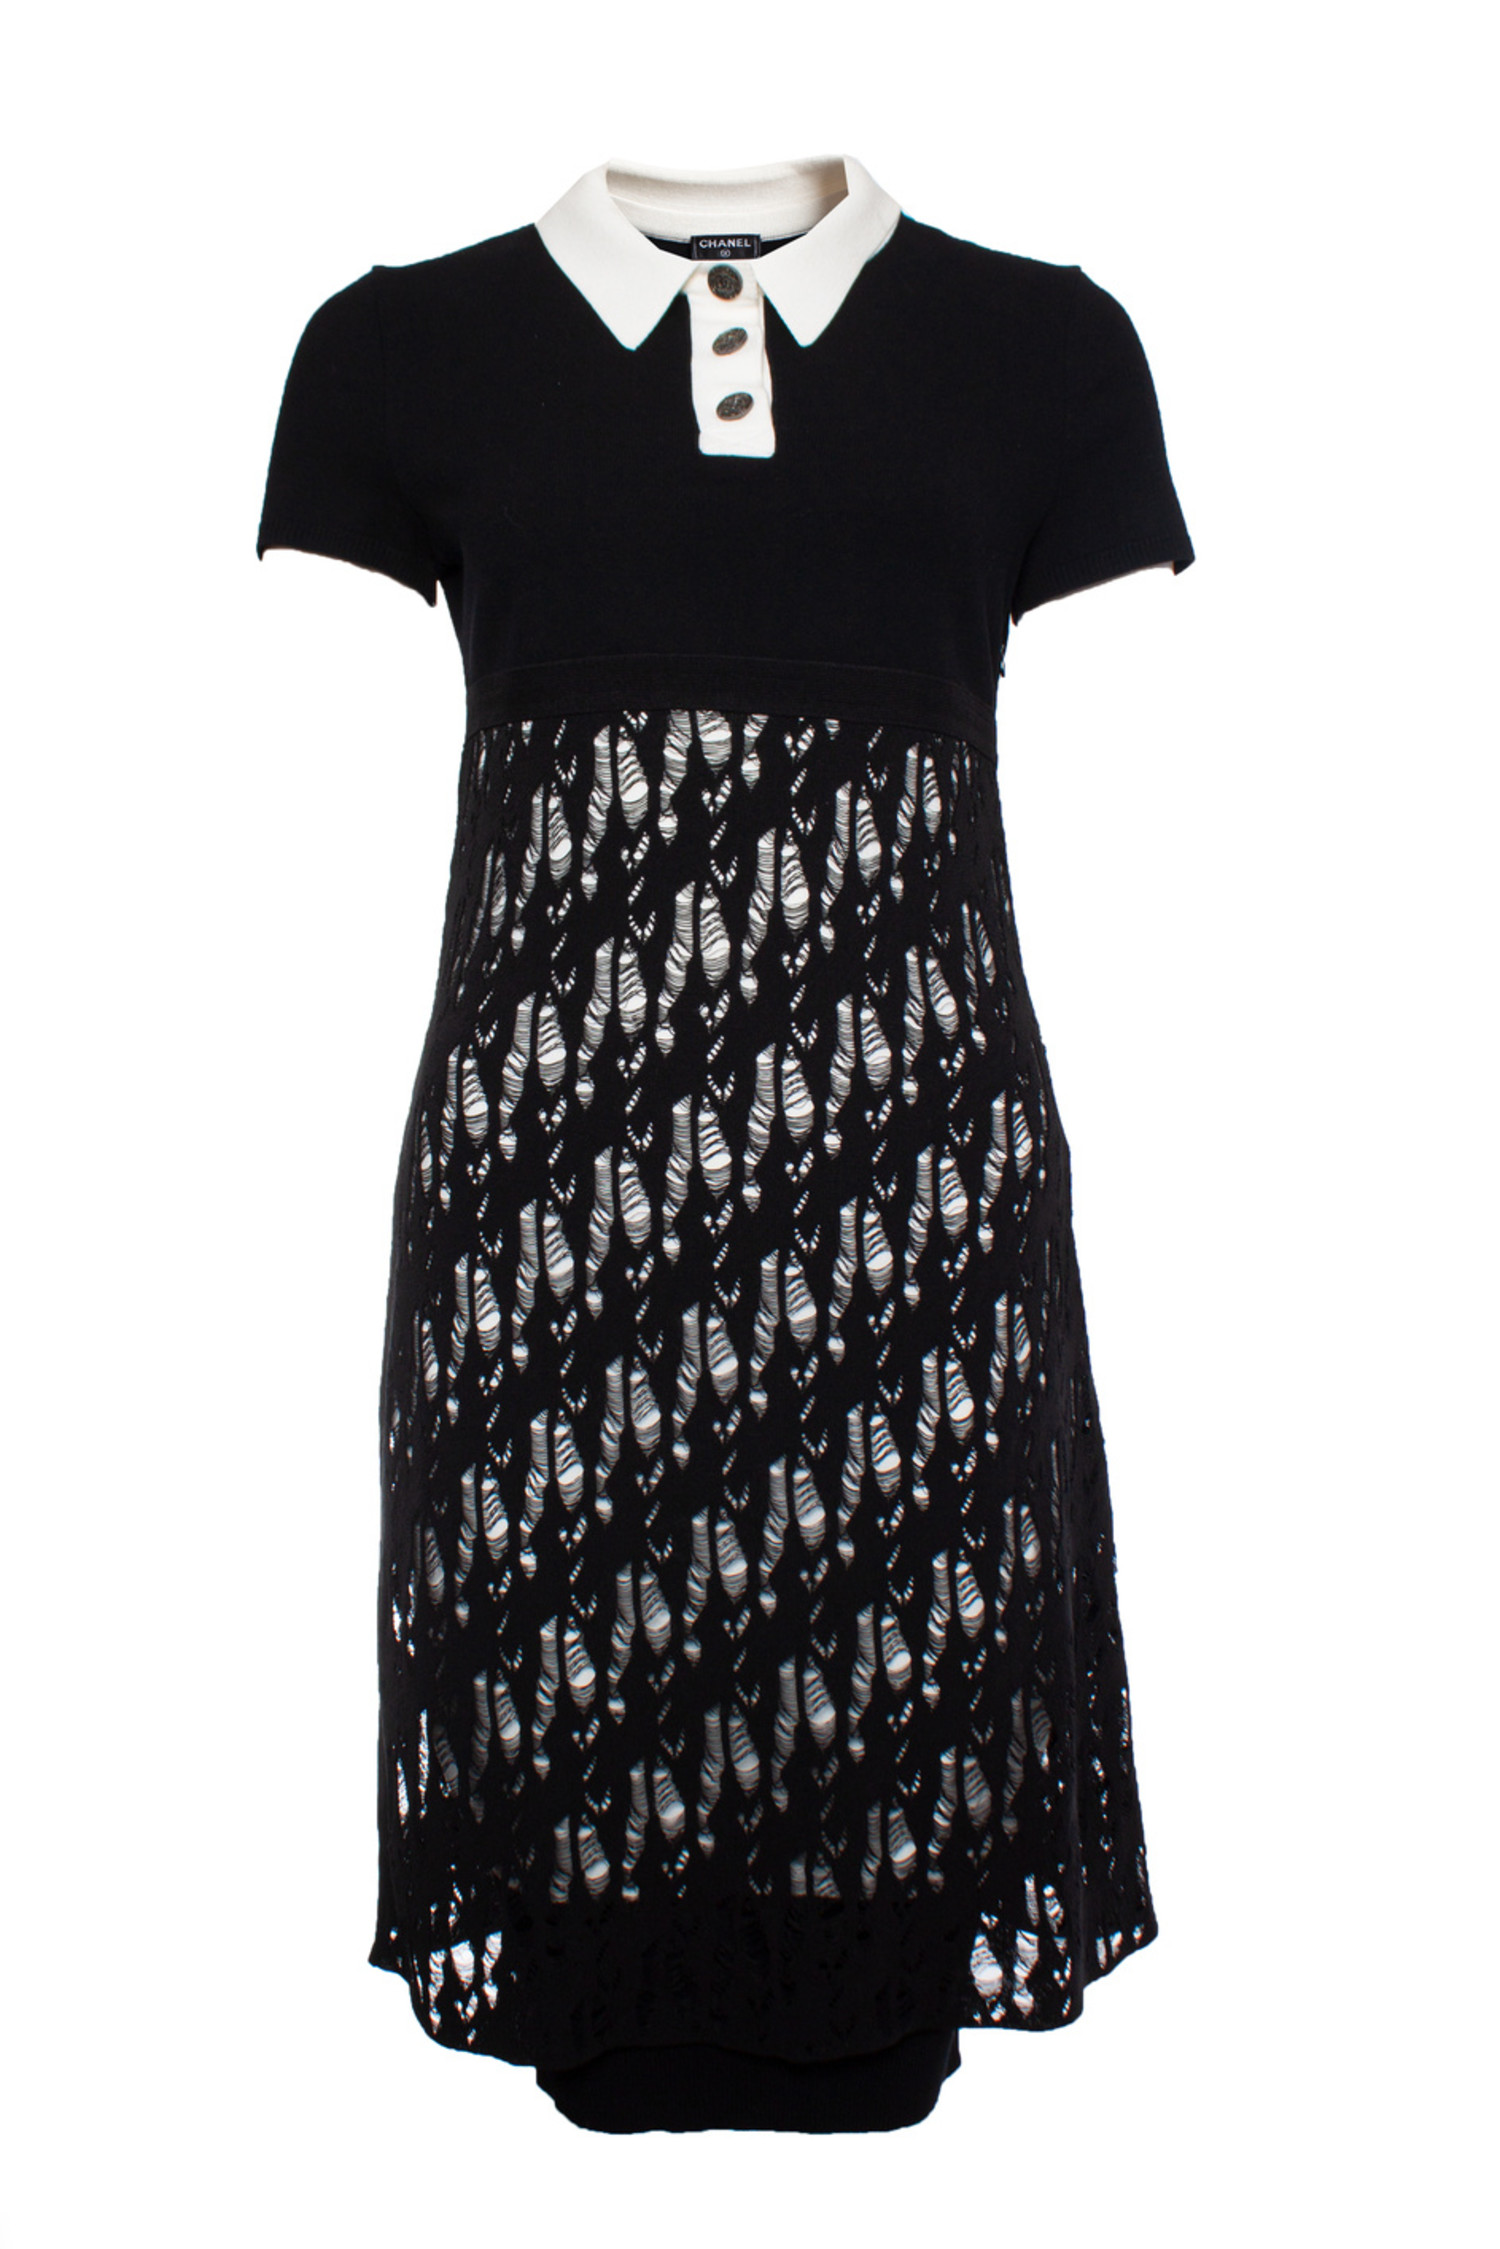 Chanel, open woven wool dress with white collar - Unique Designer Pieces